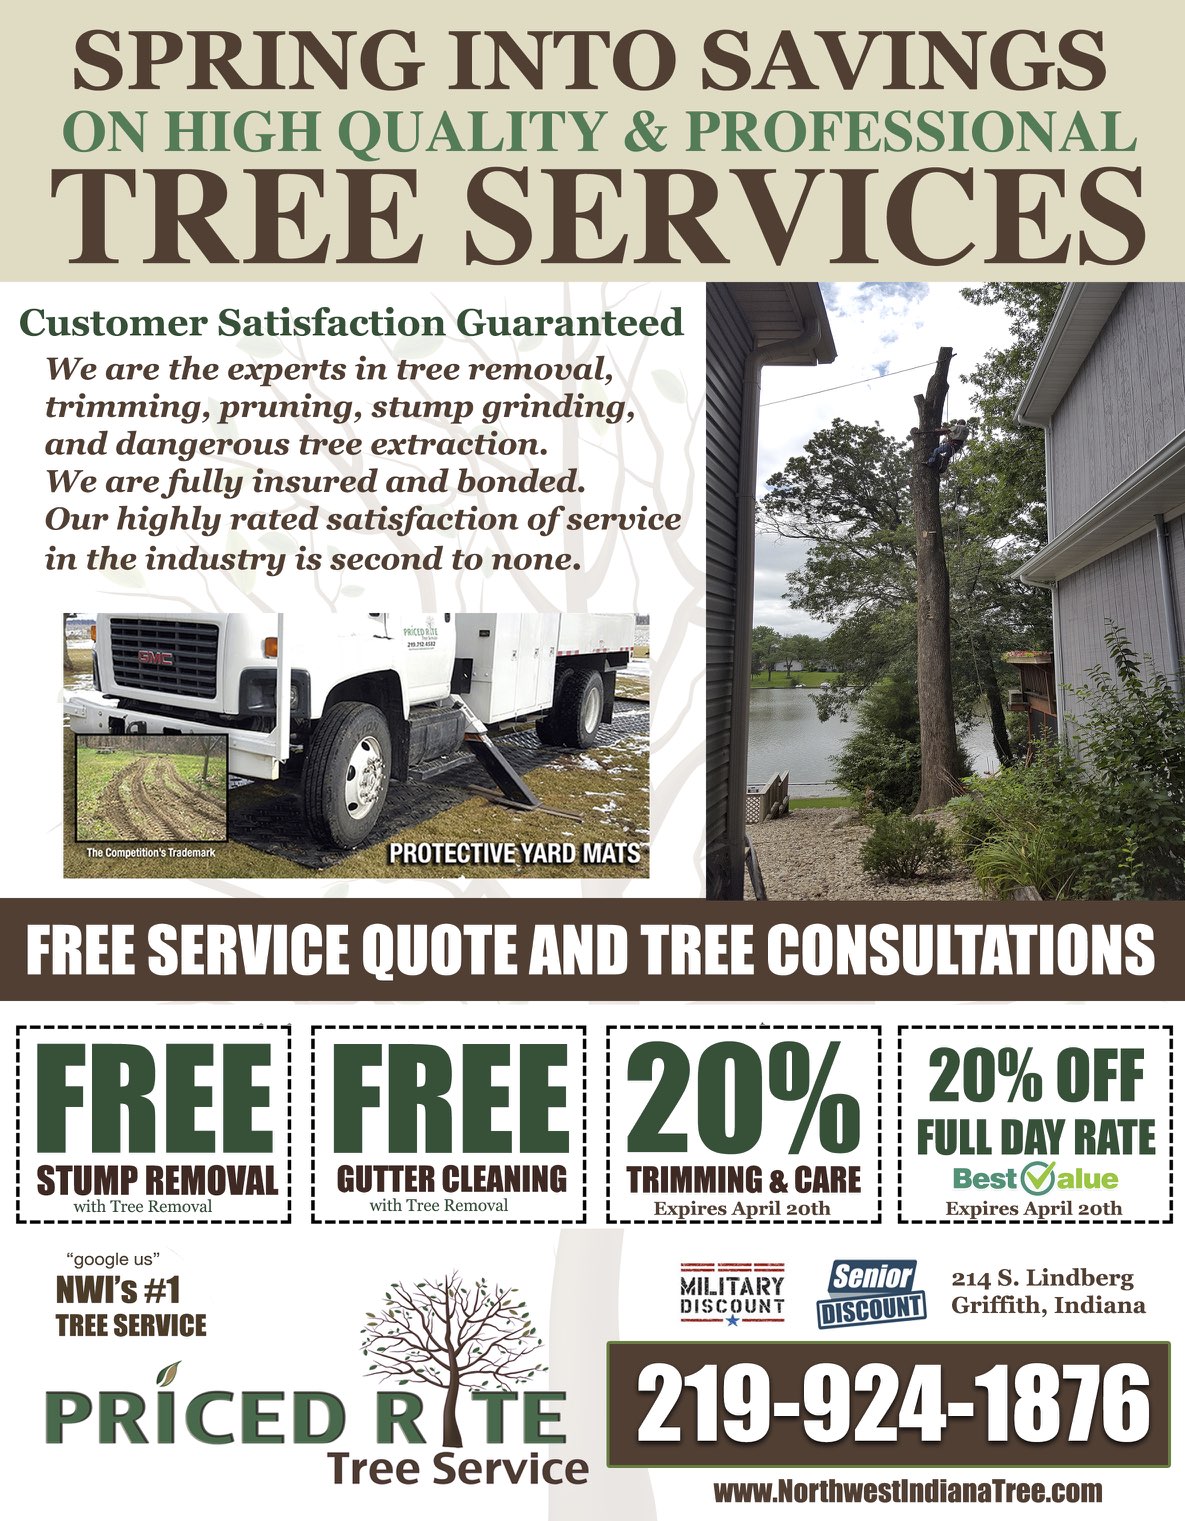 Tree Removal, Cutting, Trimming, Stump Removal Company serving